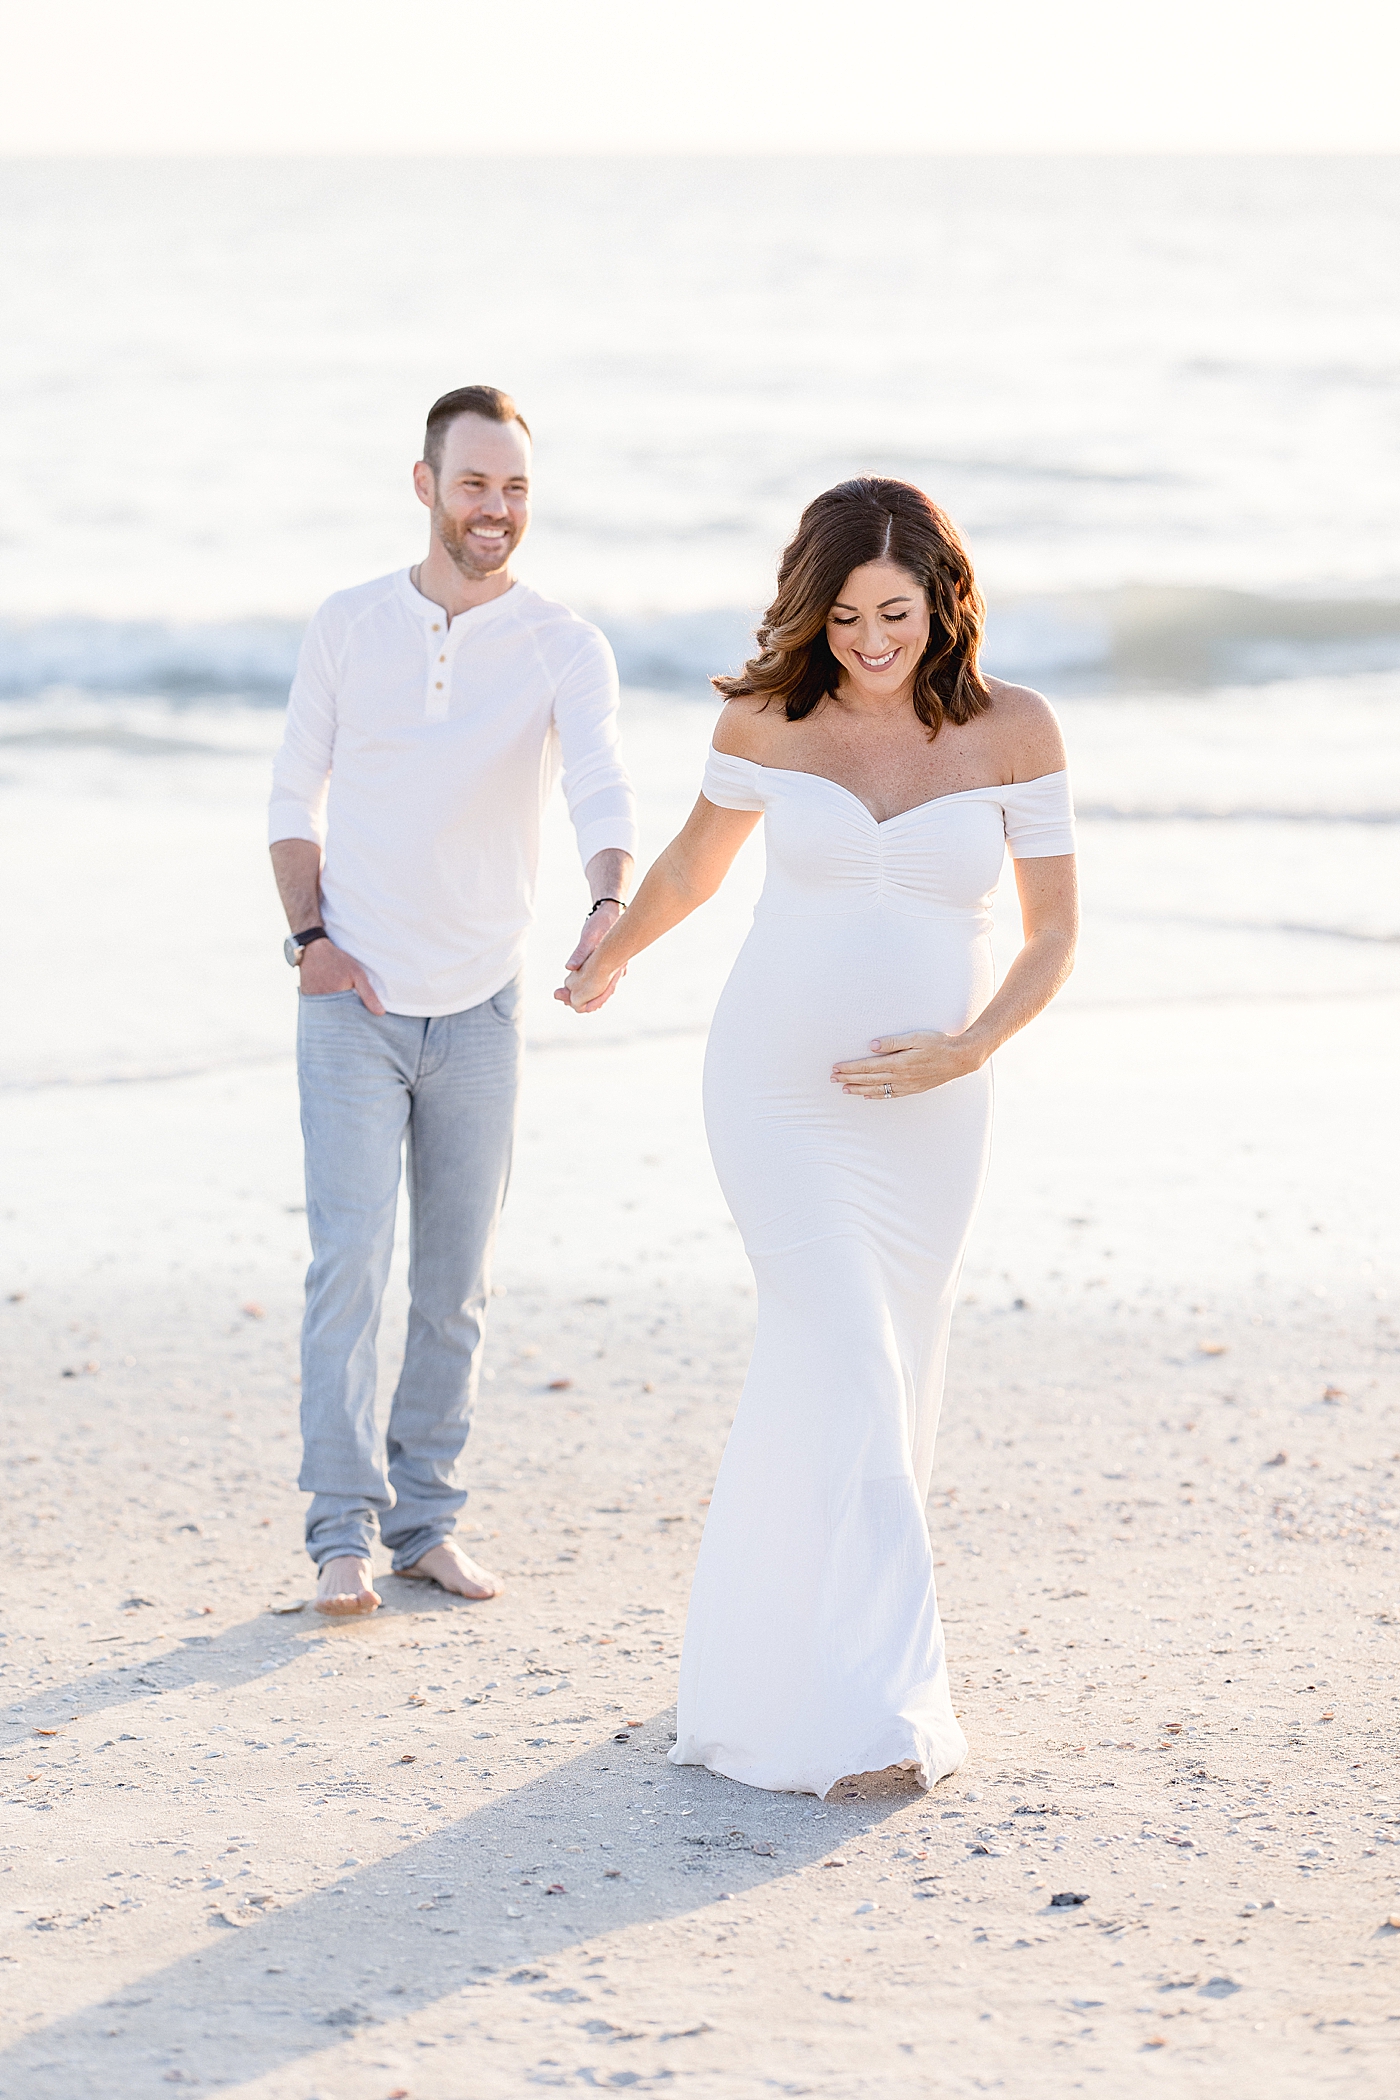 Expecting parents walking on the beach at sunset. Photo by Brittany Elise Photography.